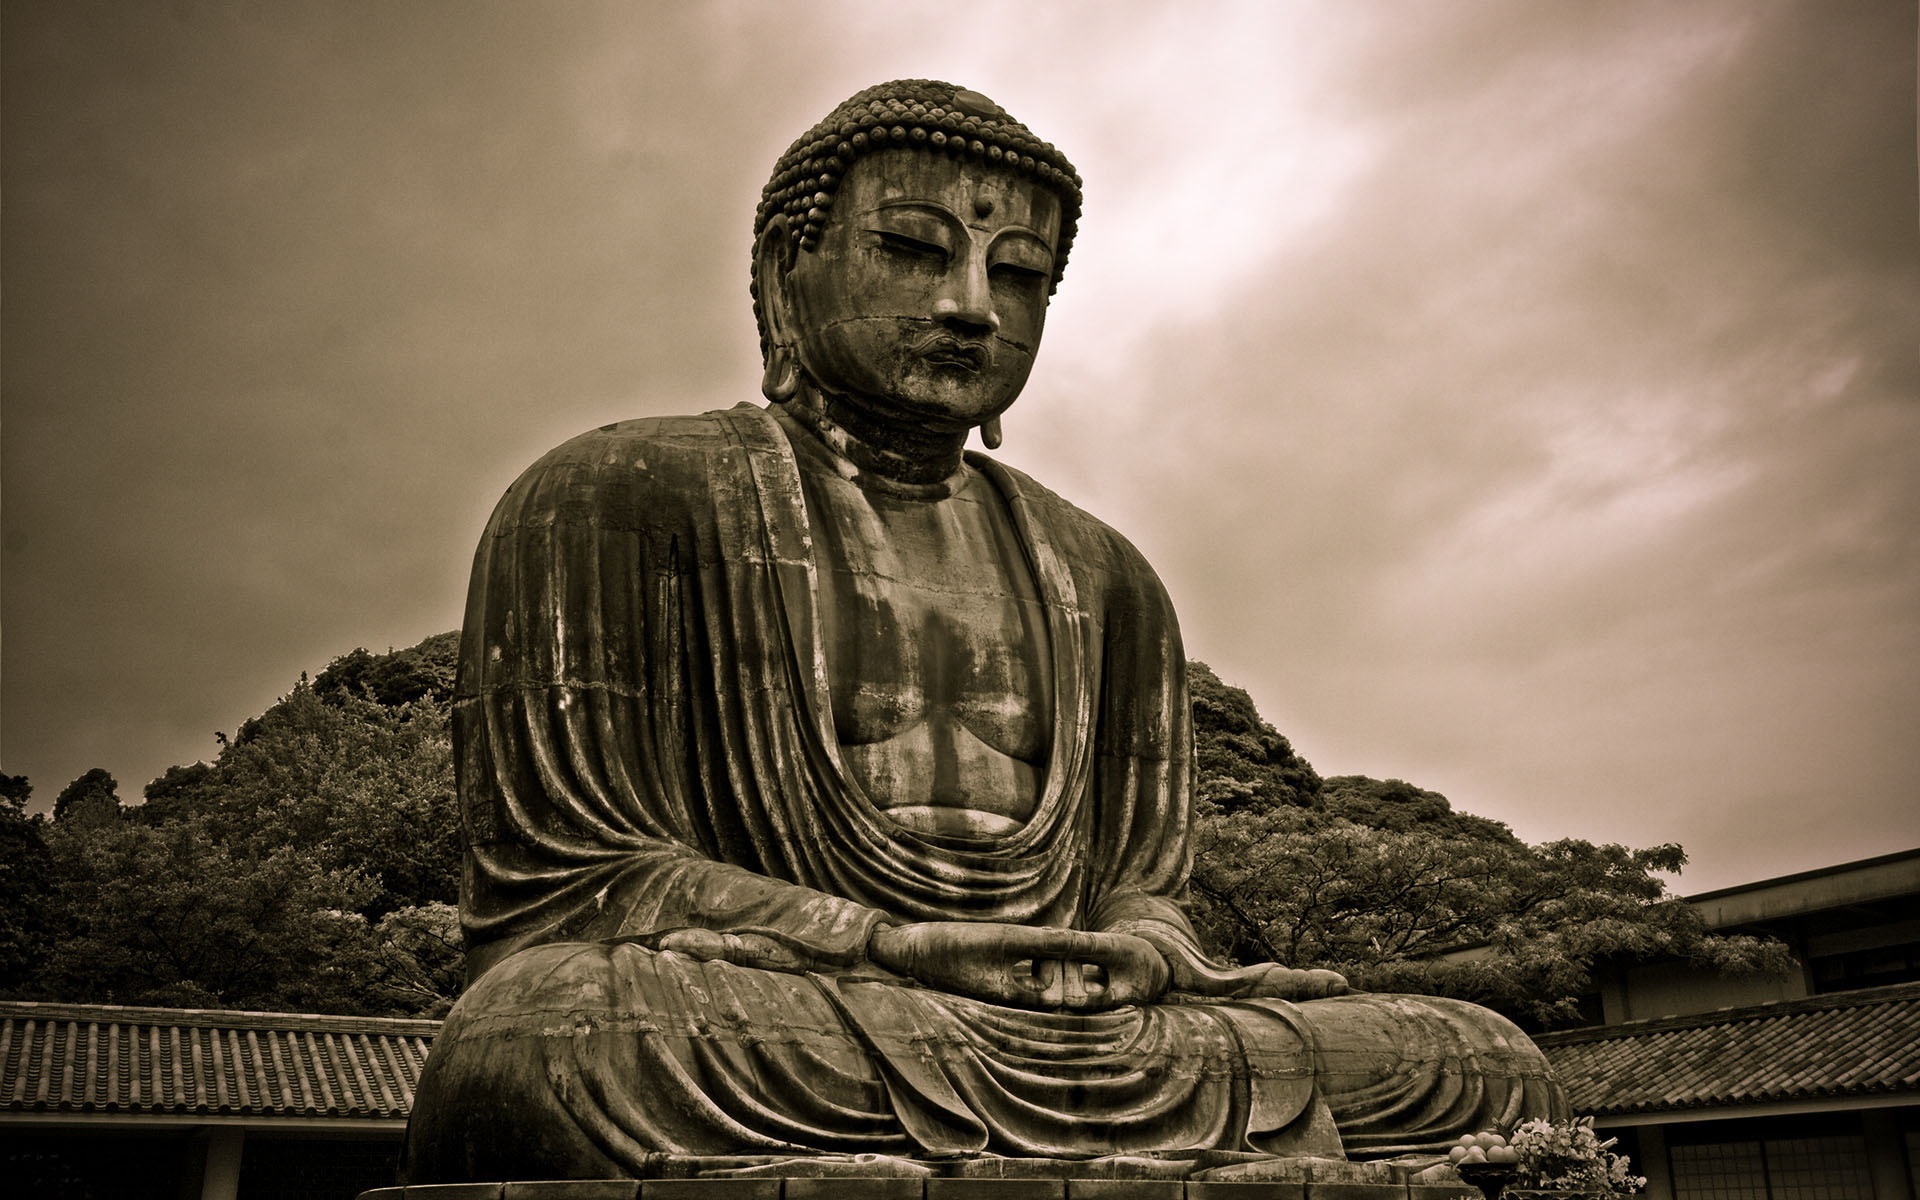 Resolution and Buddha Statues Wallpaper High Quality 1920x1200px